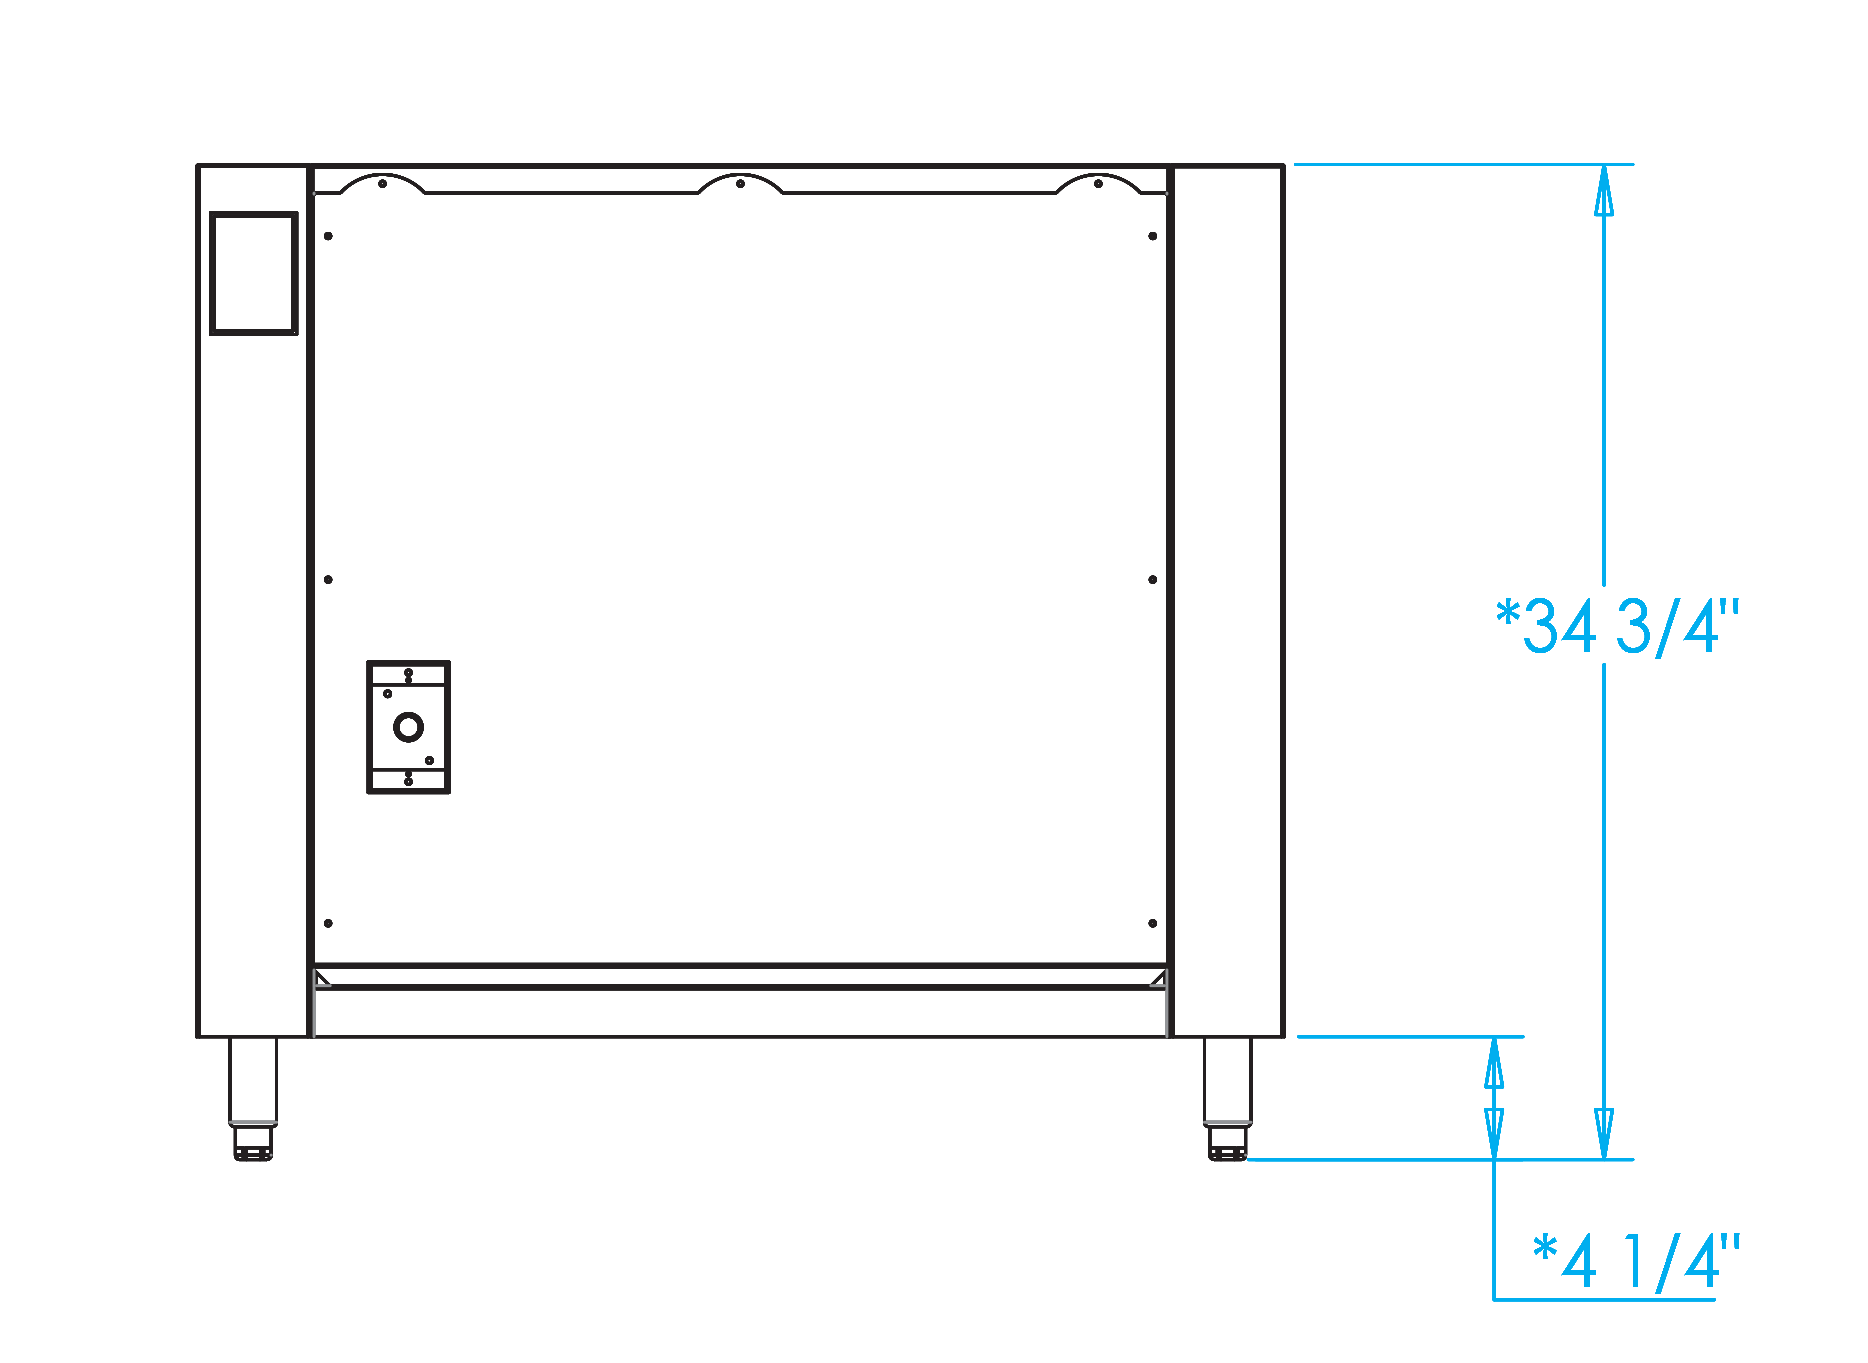 Signature 30-inch Appliance Cabinet Dimensions Image